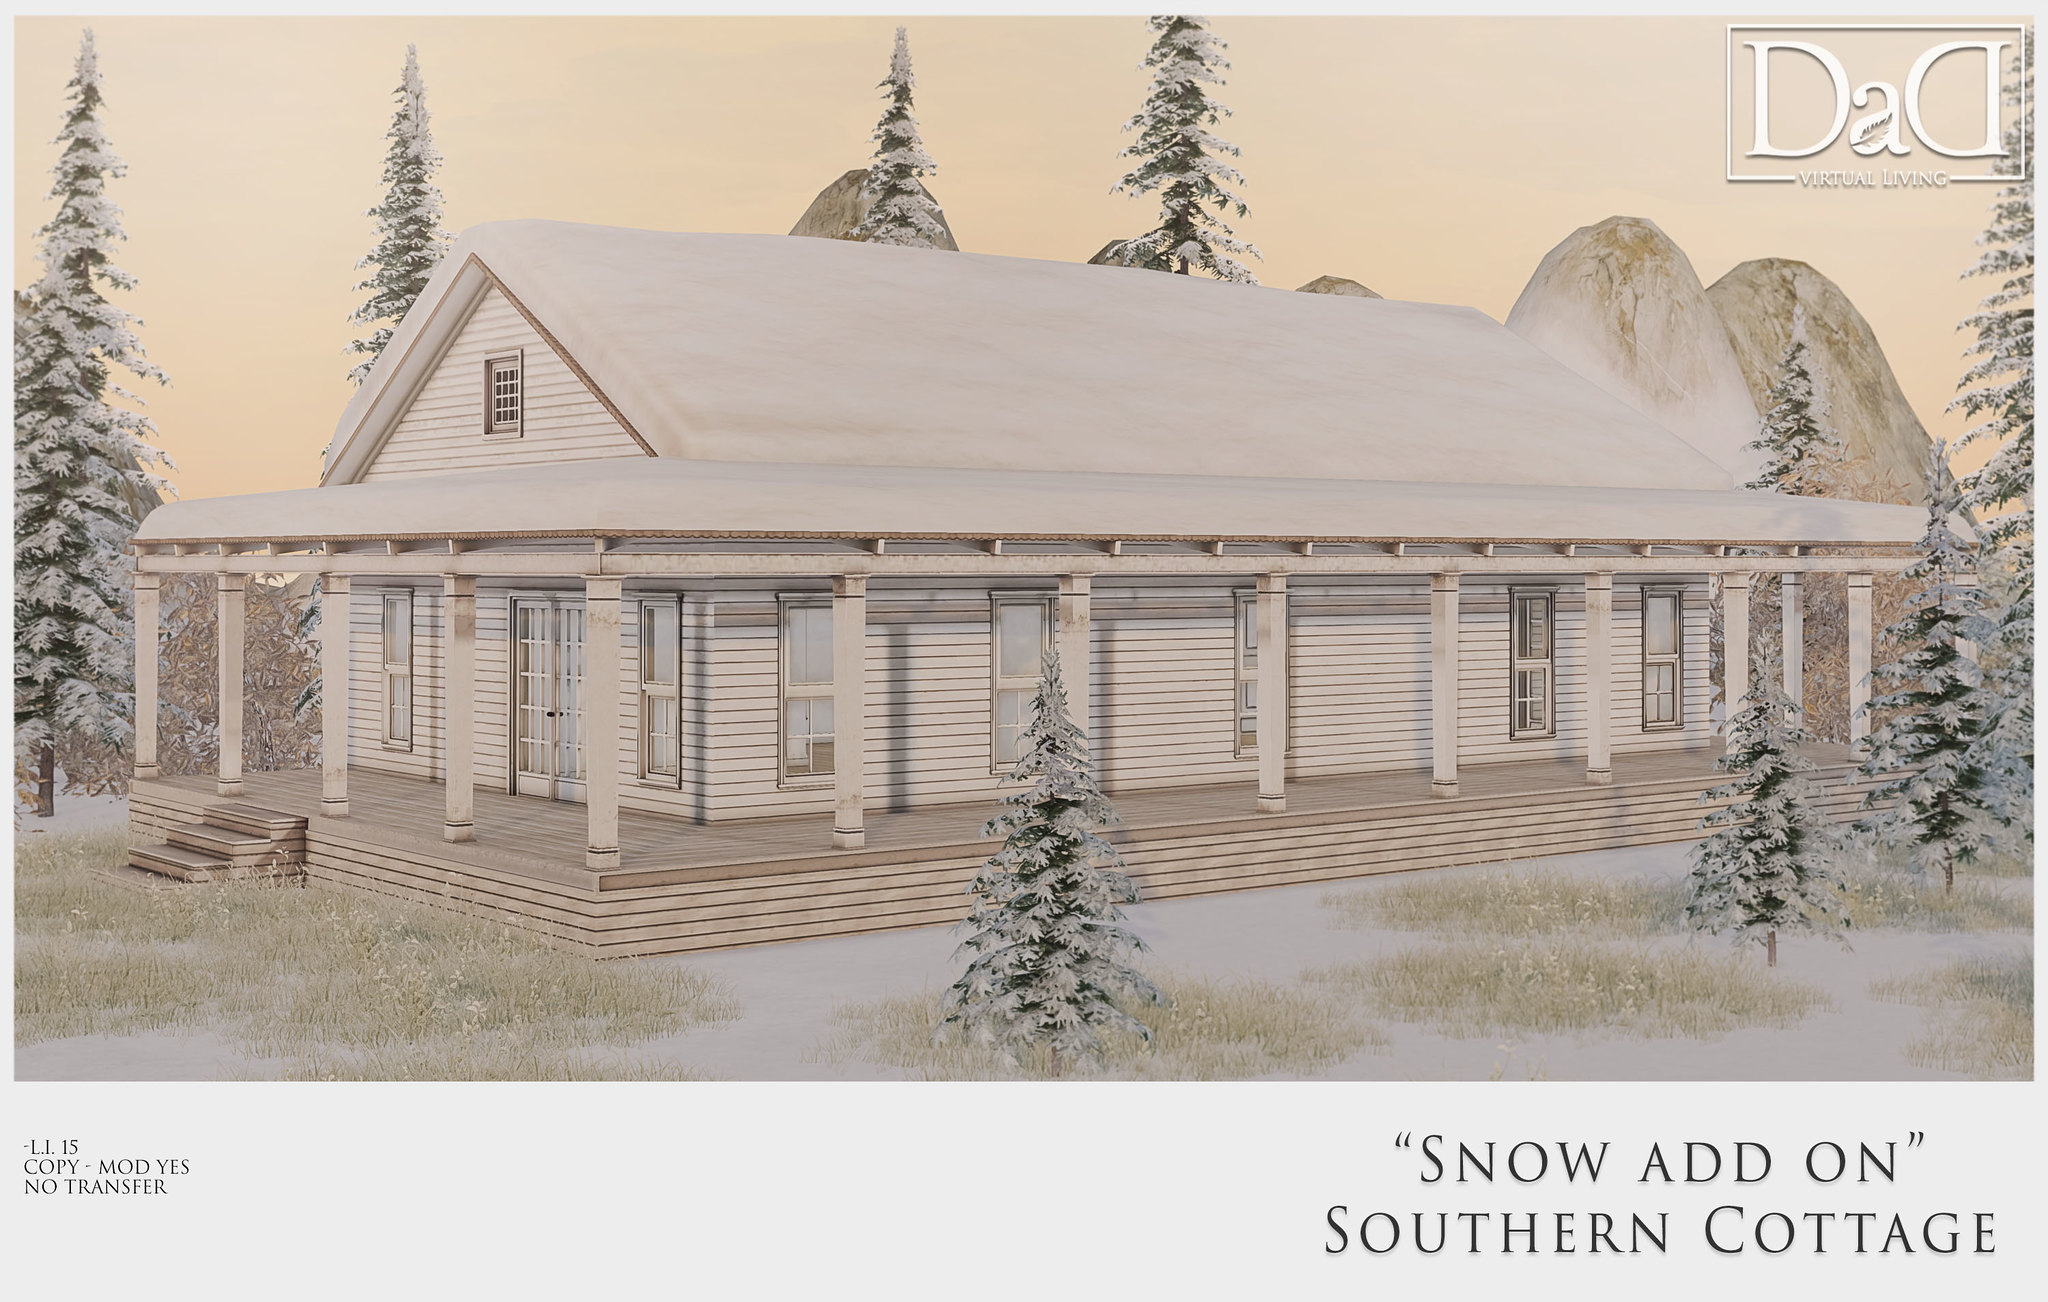 DaD Virtual Living – Southern Cottage Snow Add On